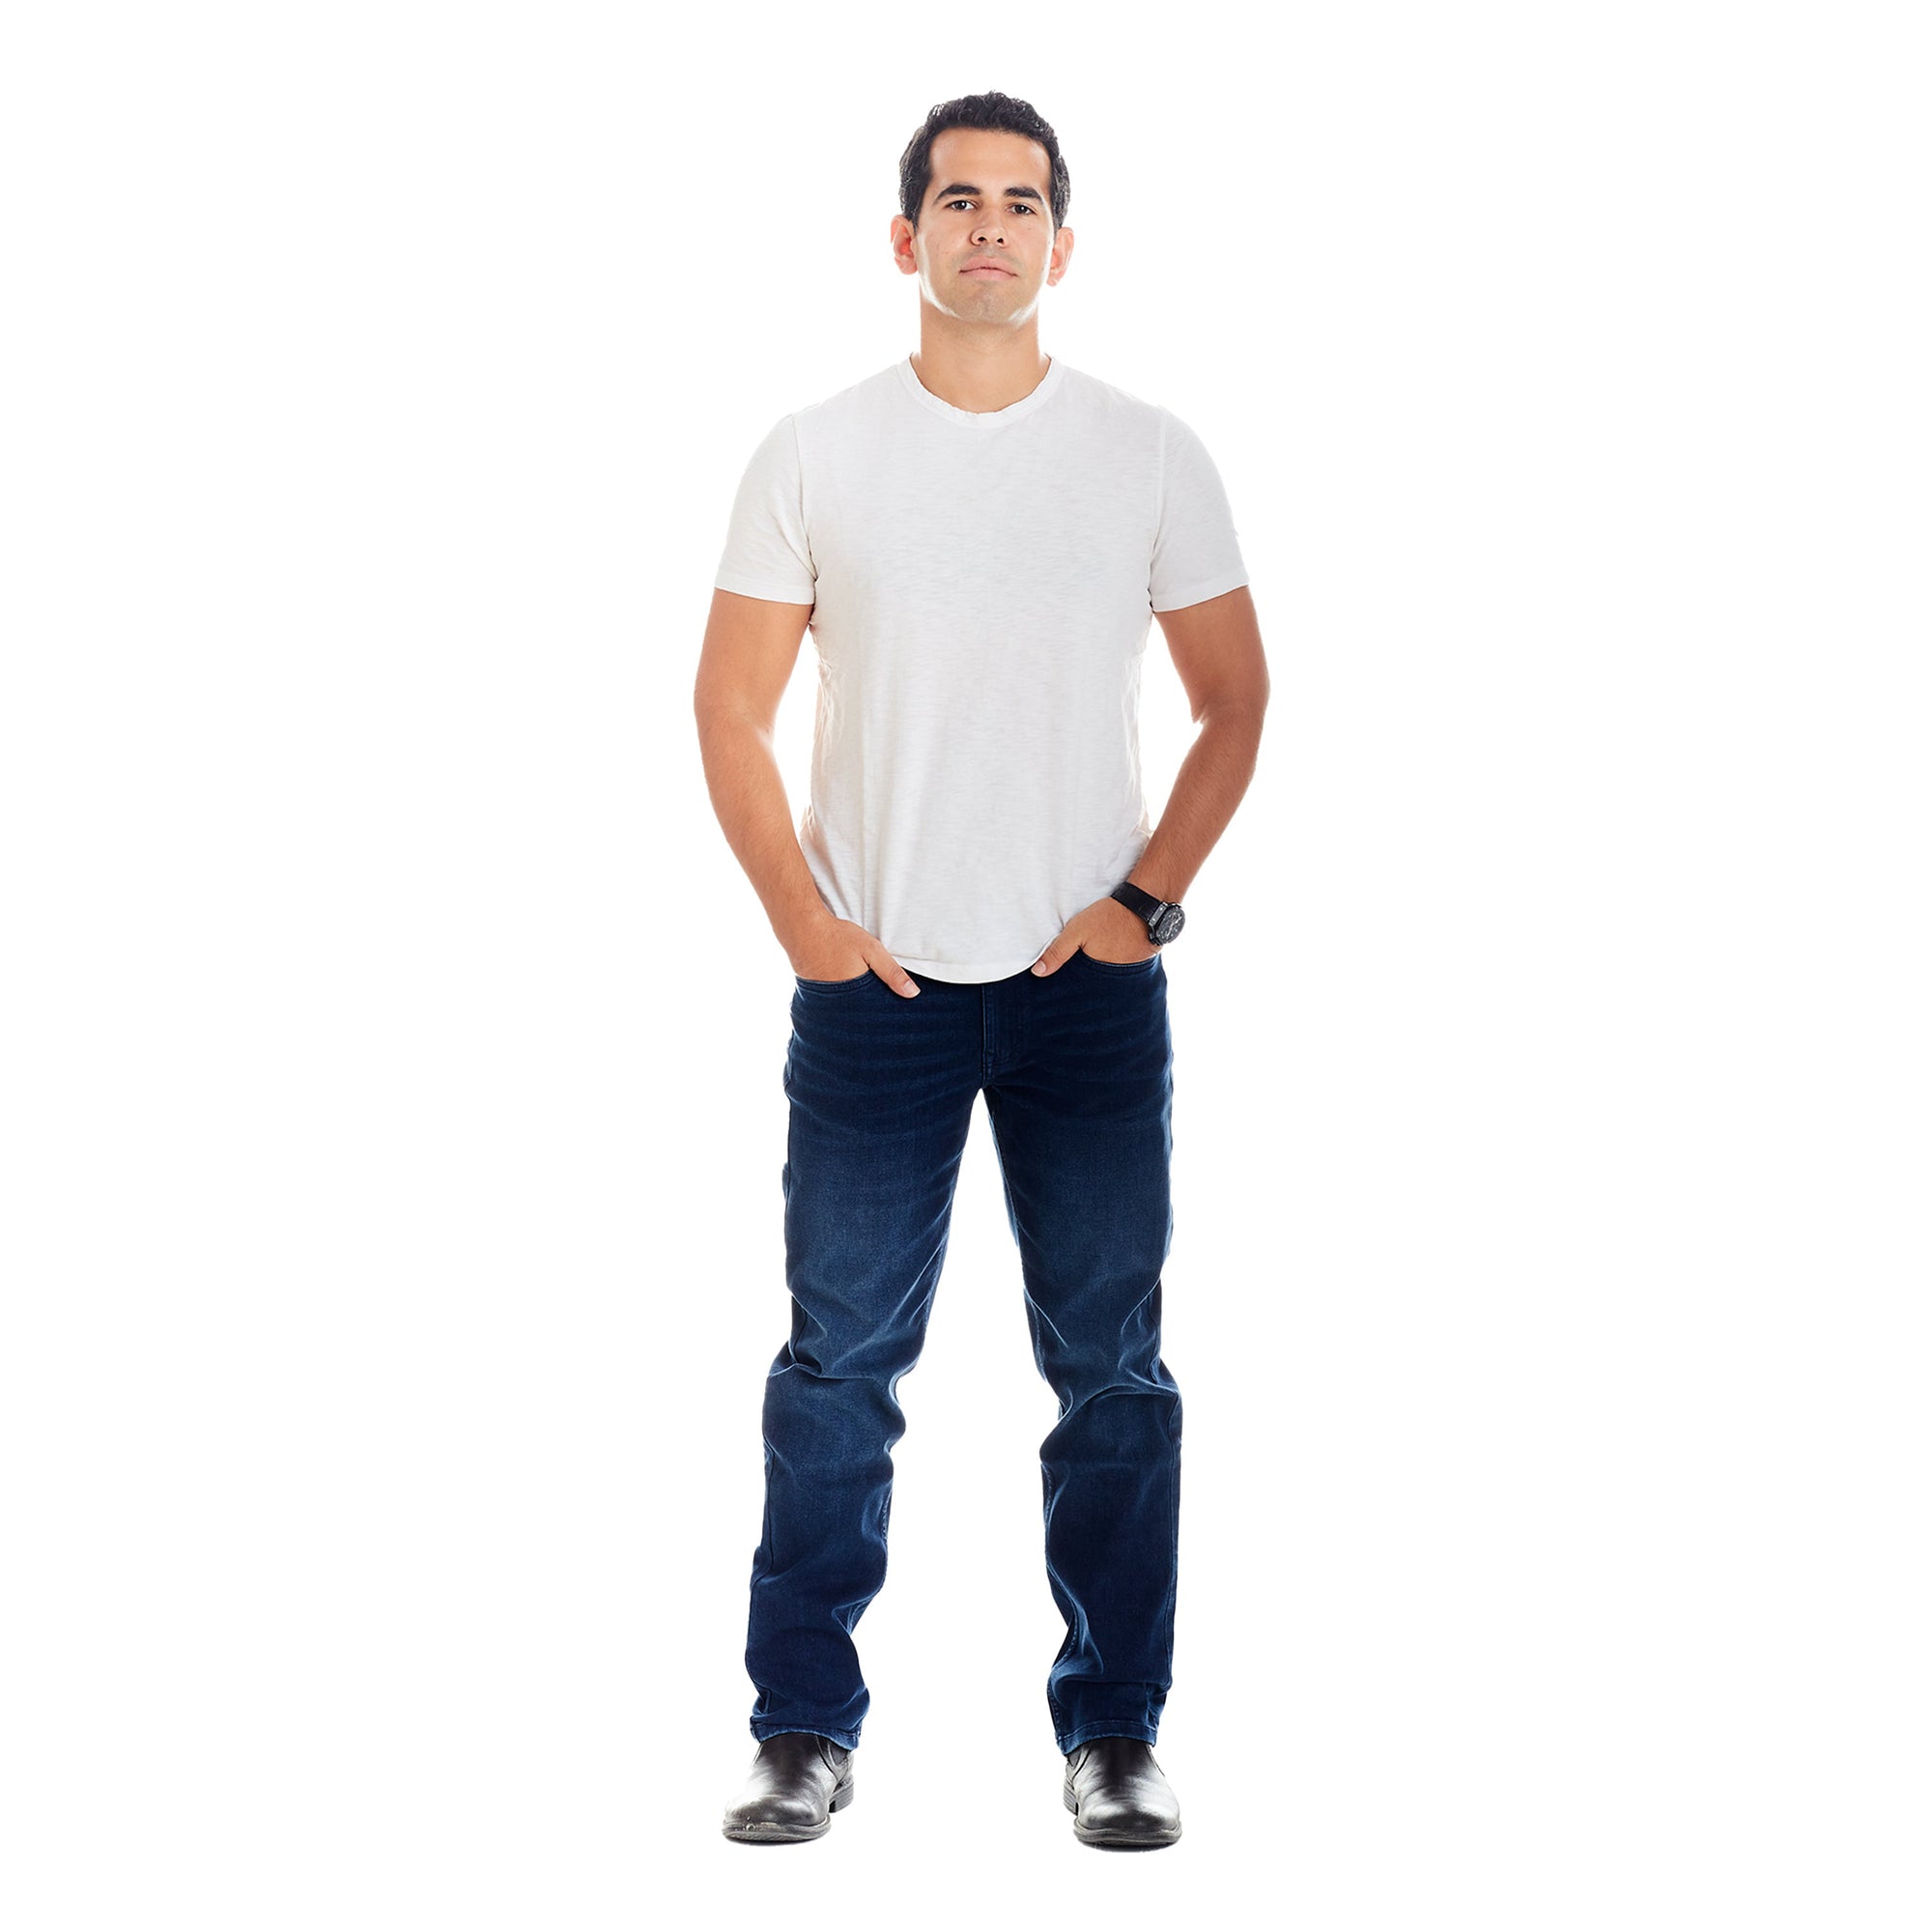 Athletic Fit / Knight - Dark Blue Jeans